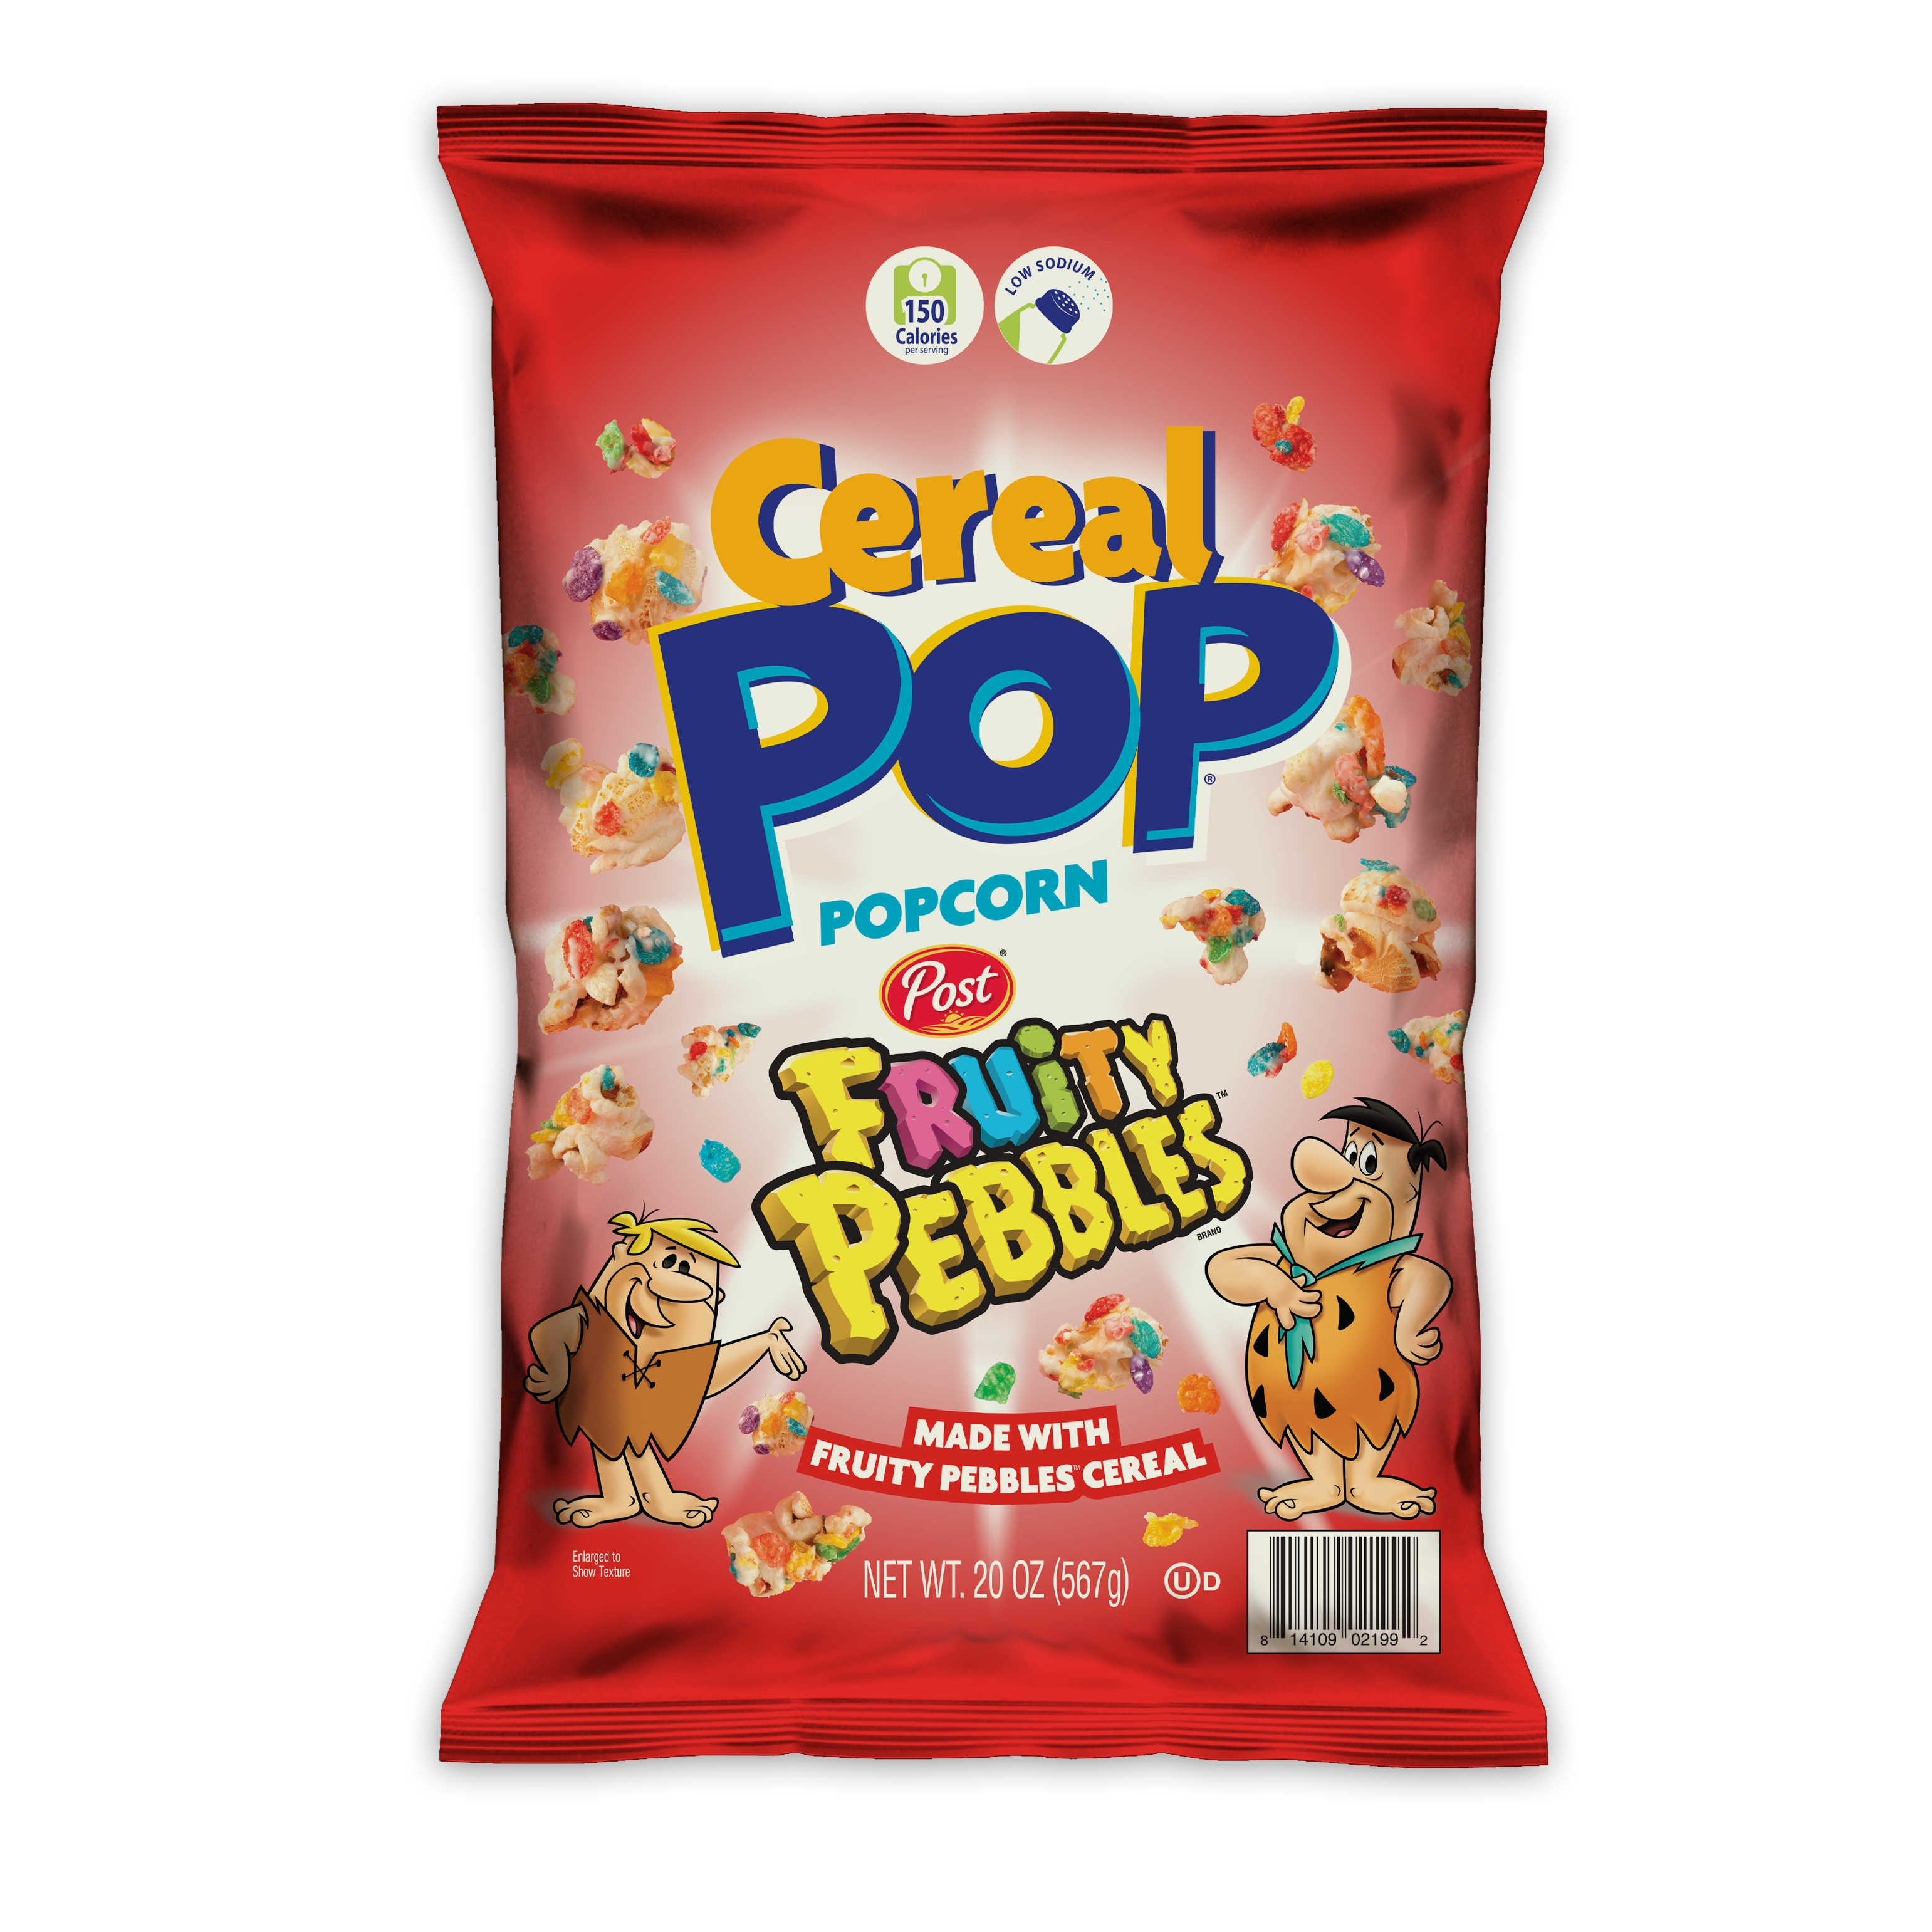 SNACK INDUSTRY INNOVATOR SNAX-SATIONAL BRANDS DEBUTS “CEREAL POP” WITH  EXCITING FLAVOR FRUITY PEBBLES® AT SAM'S CLUB